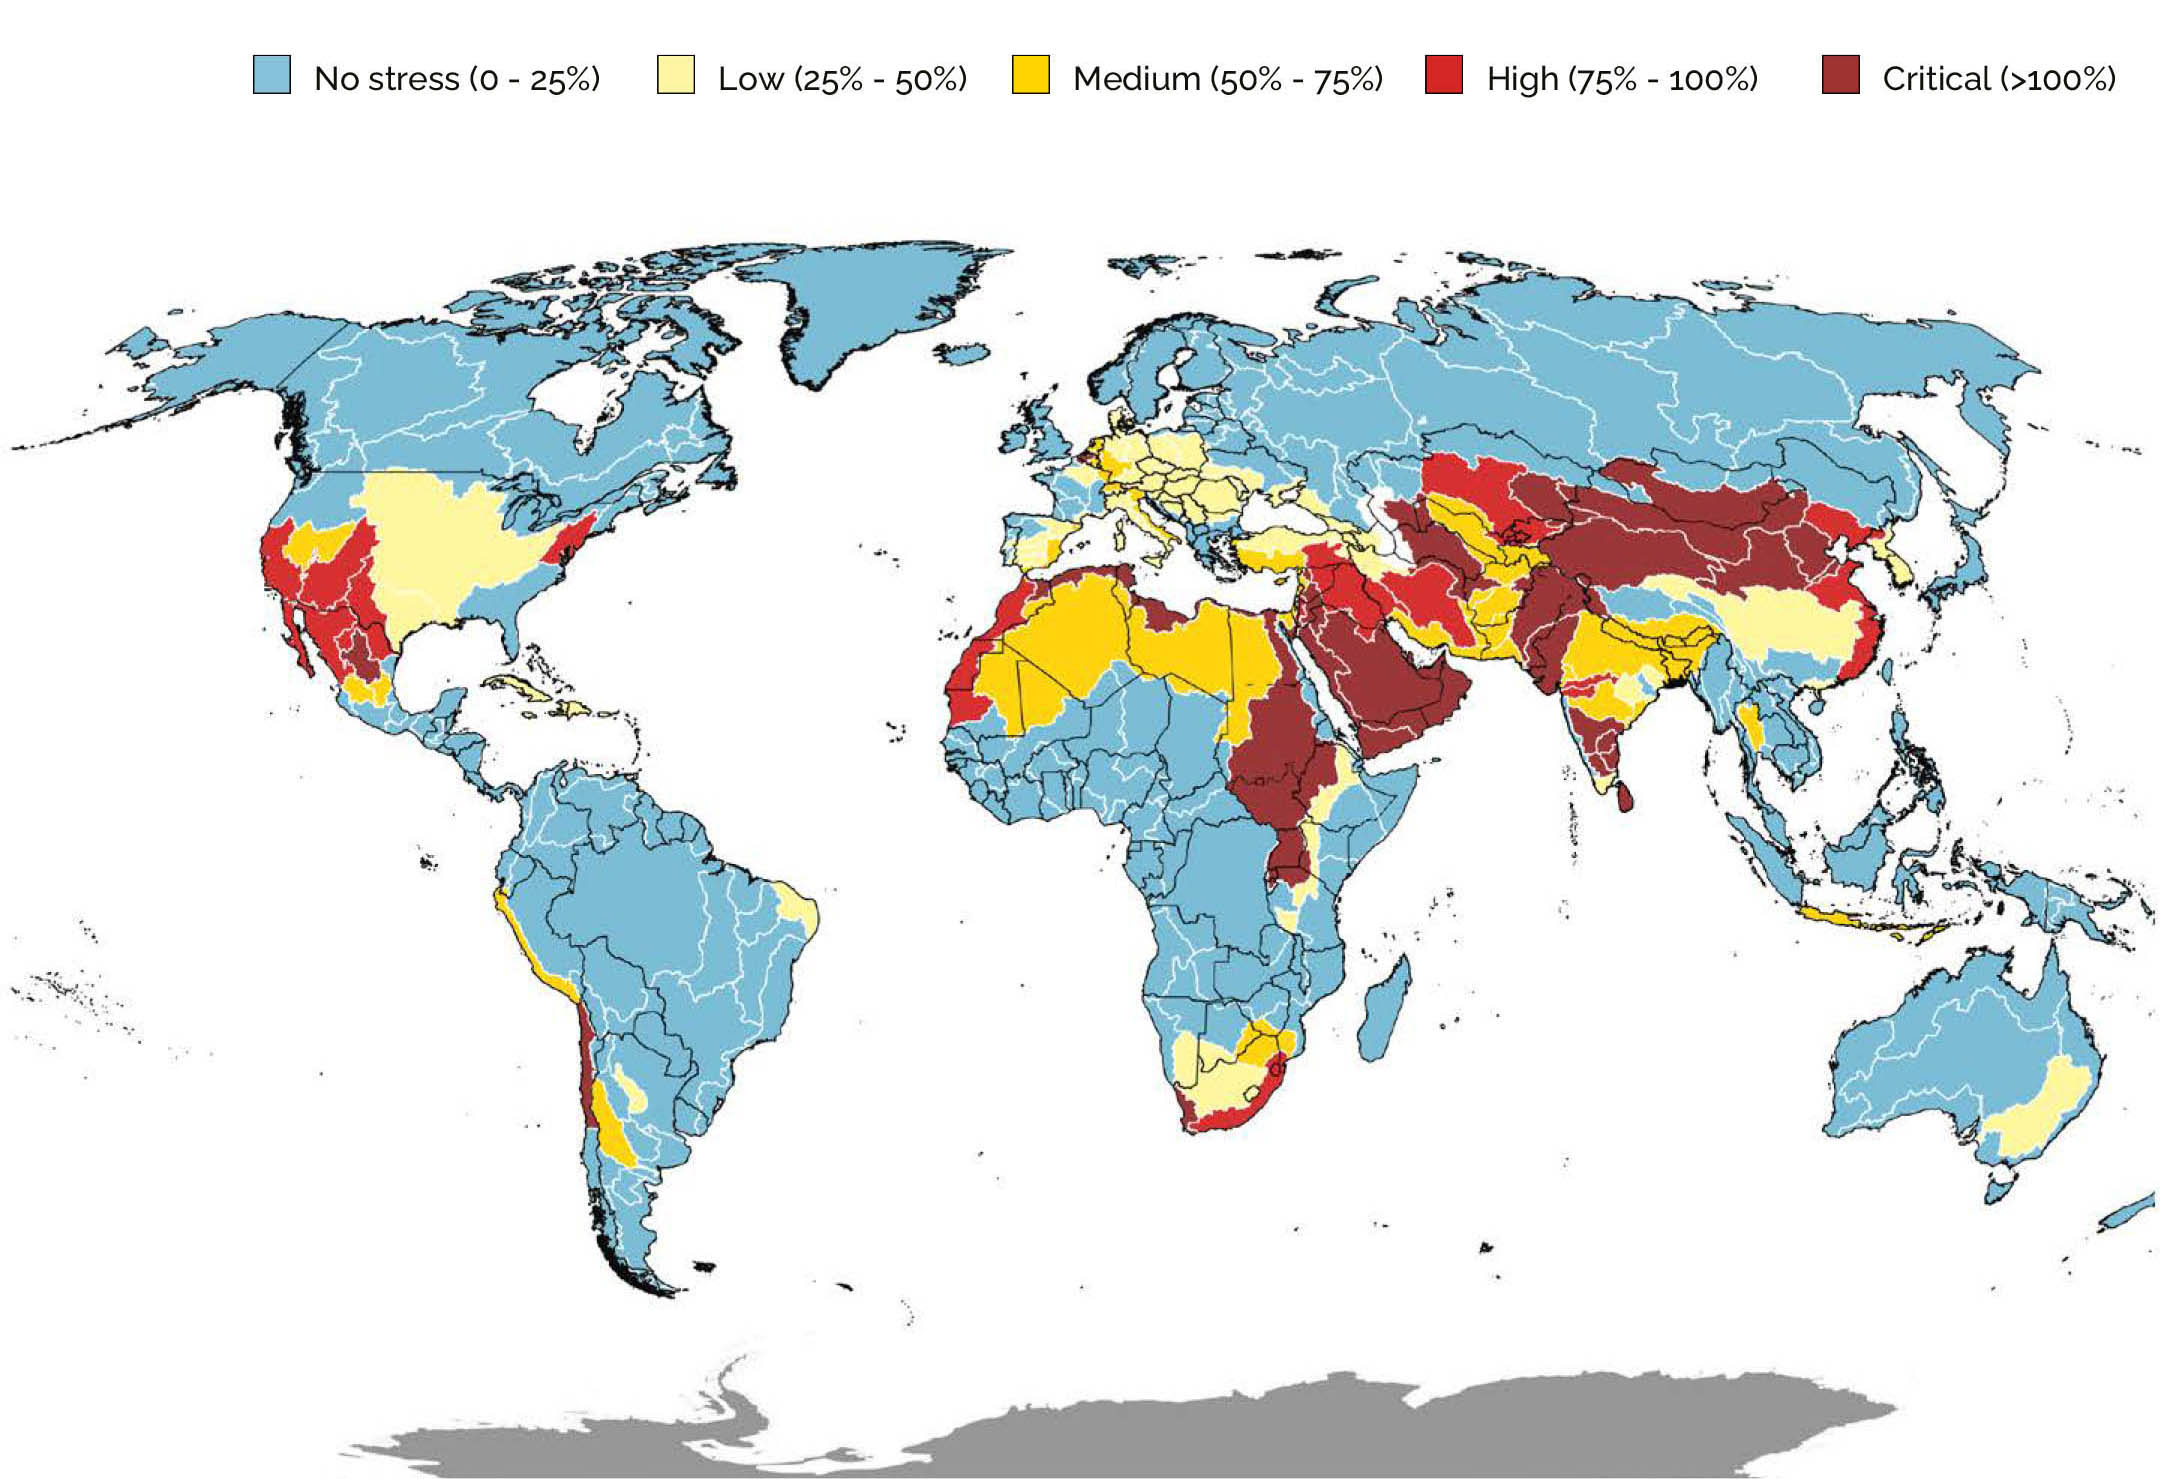 Source: FAO and UN-Water, 2021, modified to comply with UN, 2021.